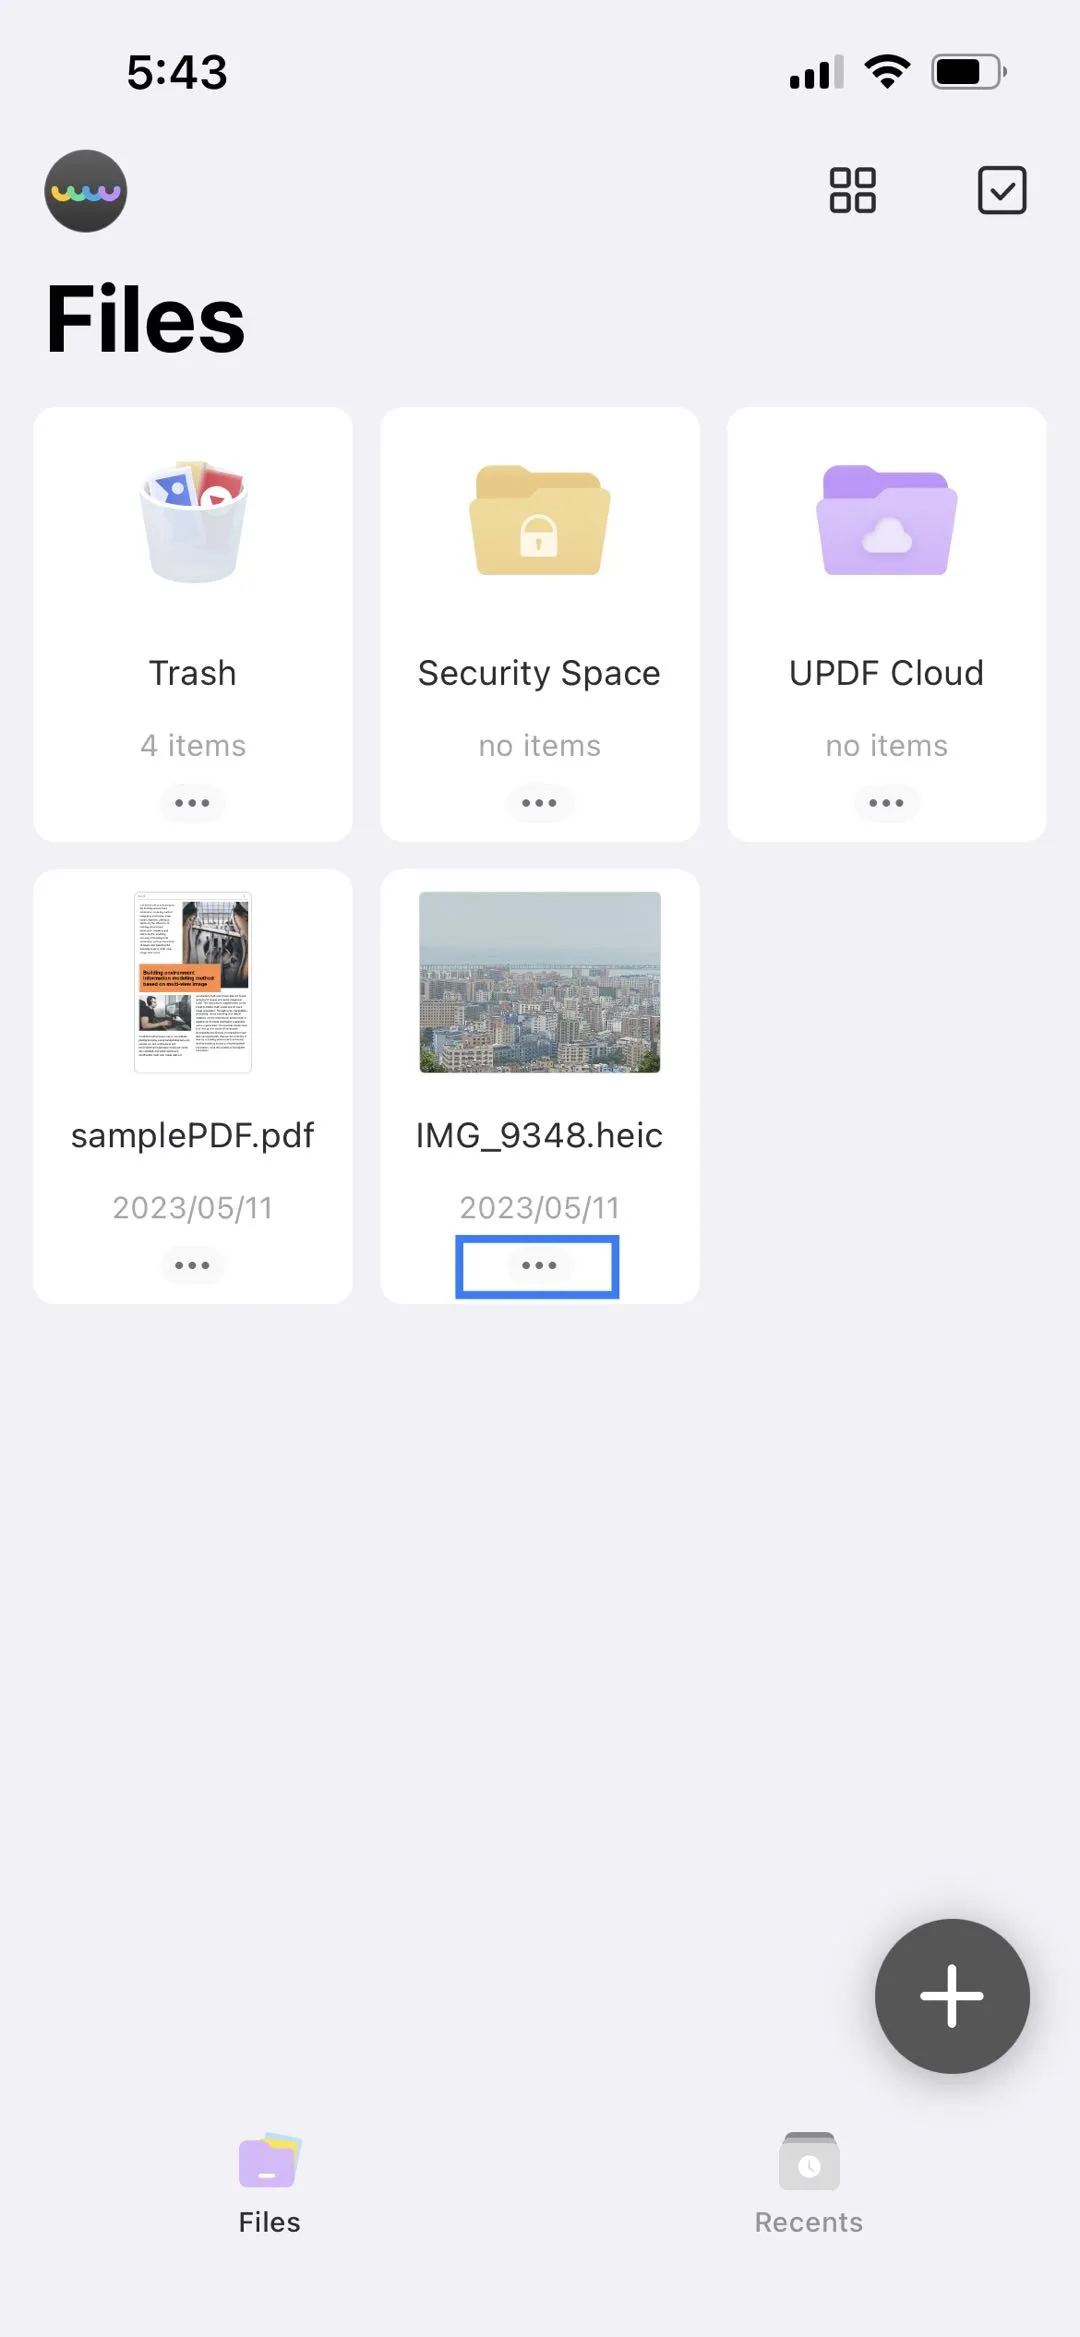 how to save screenshot on updf